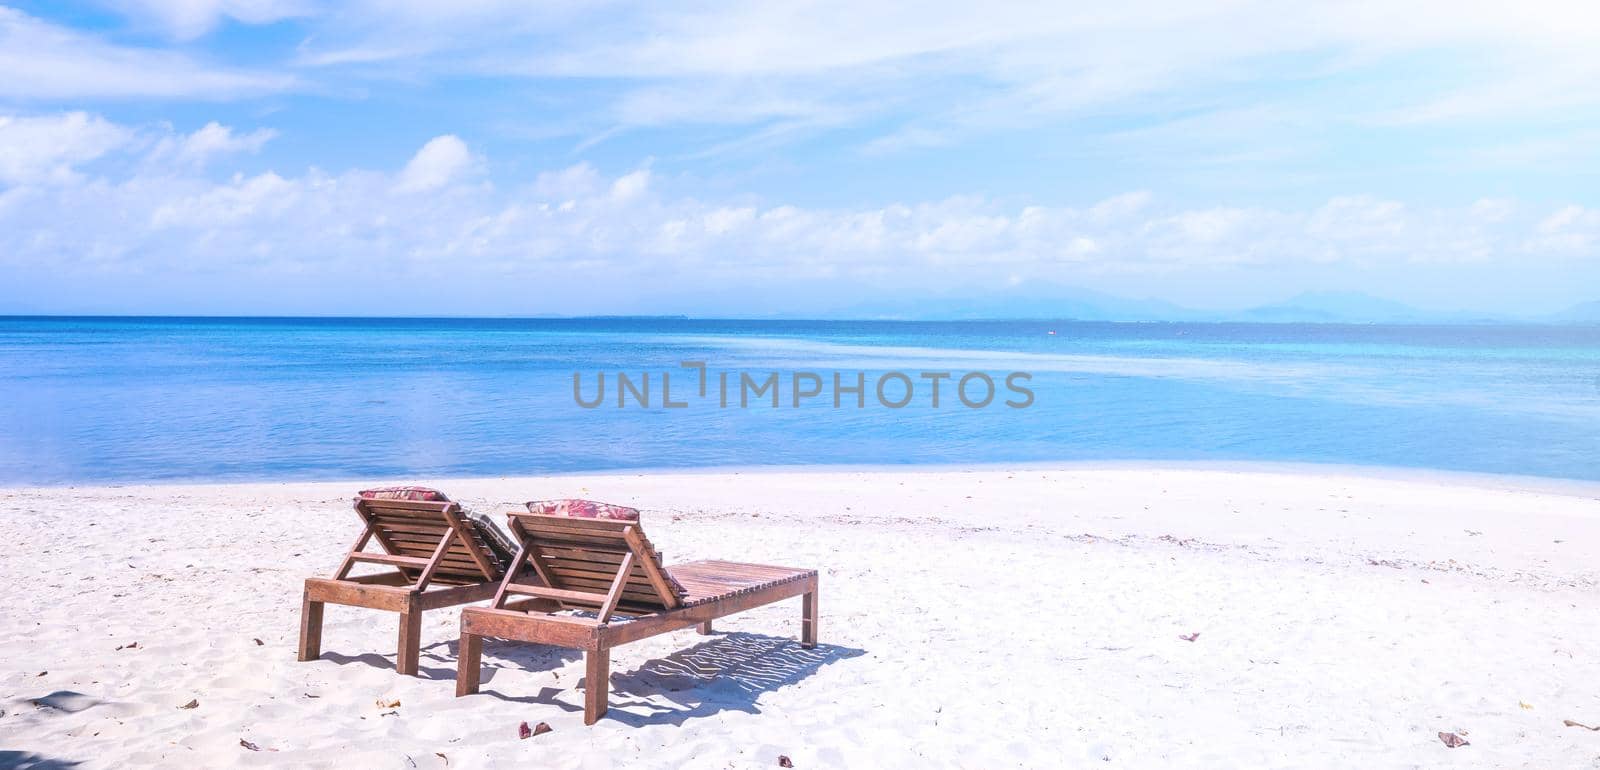 Chairs on the amazing beautiful sandy beach near the ocean with blue sky. Concept of summer leisure calm vacation for a tourism idea. Empty copy space, inspiration of tropical landscape